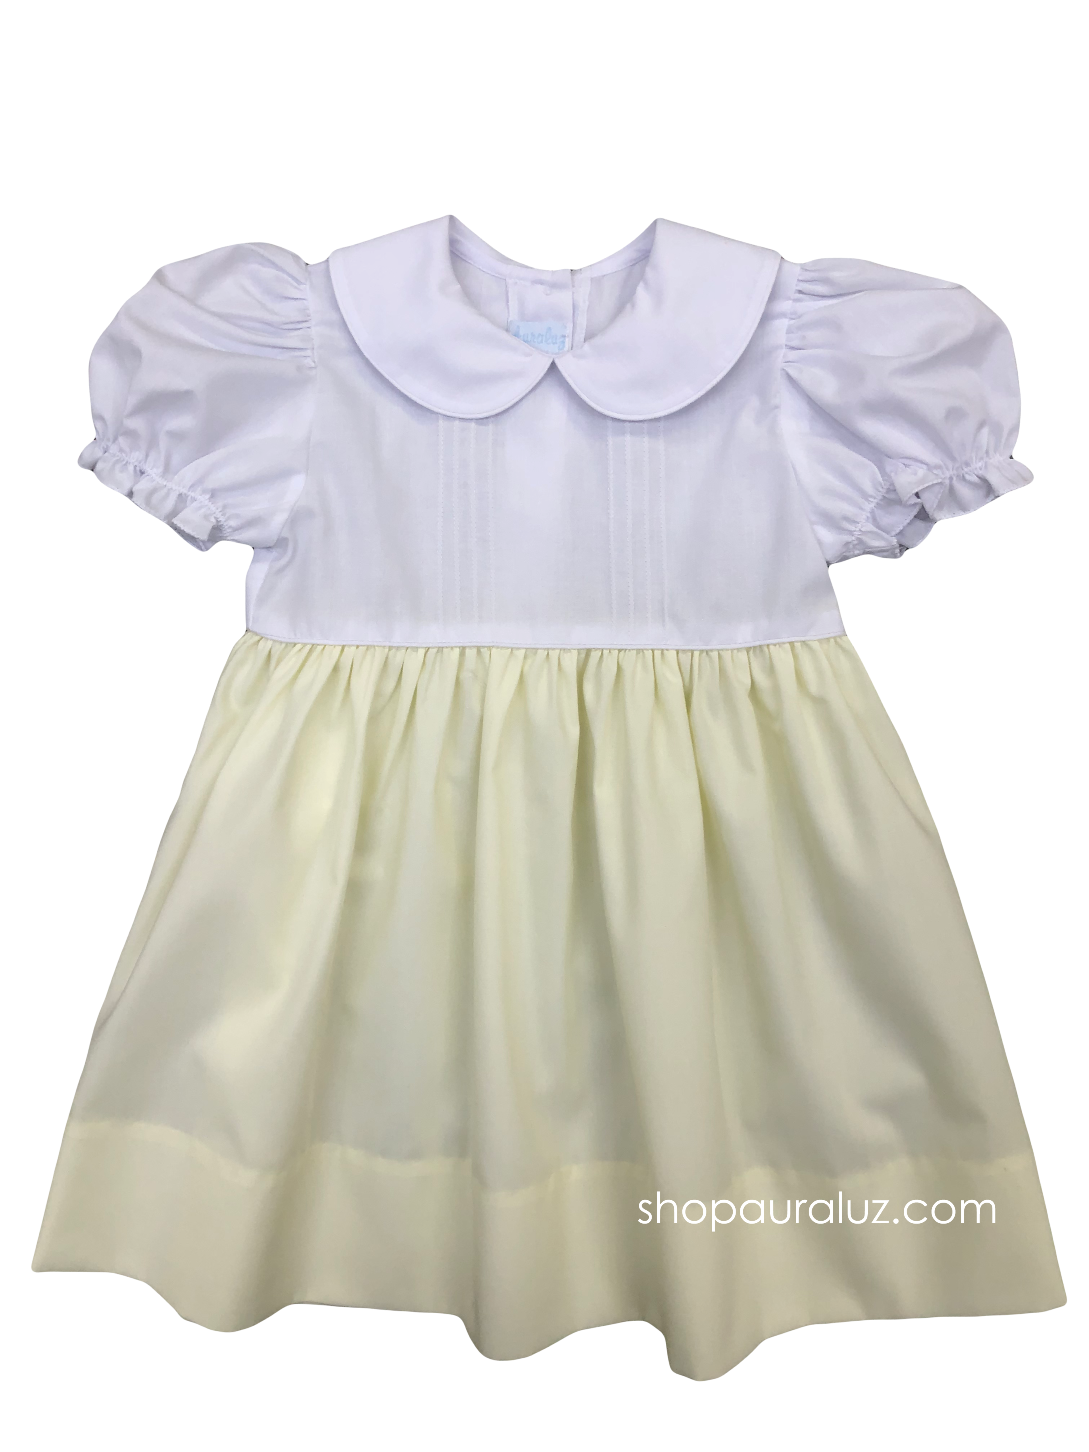 Auraluz Dress...Yellow/white with tucks and p.p. collar